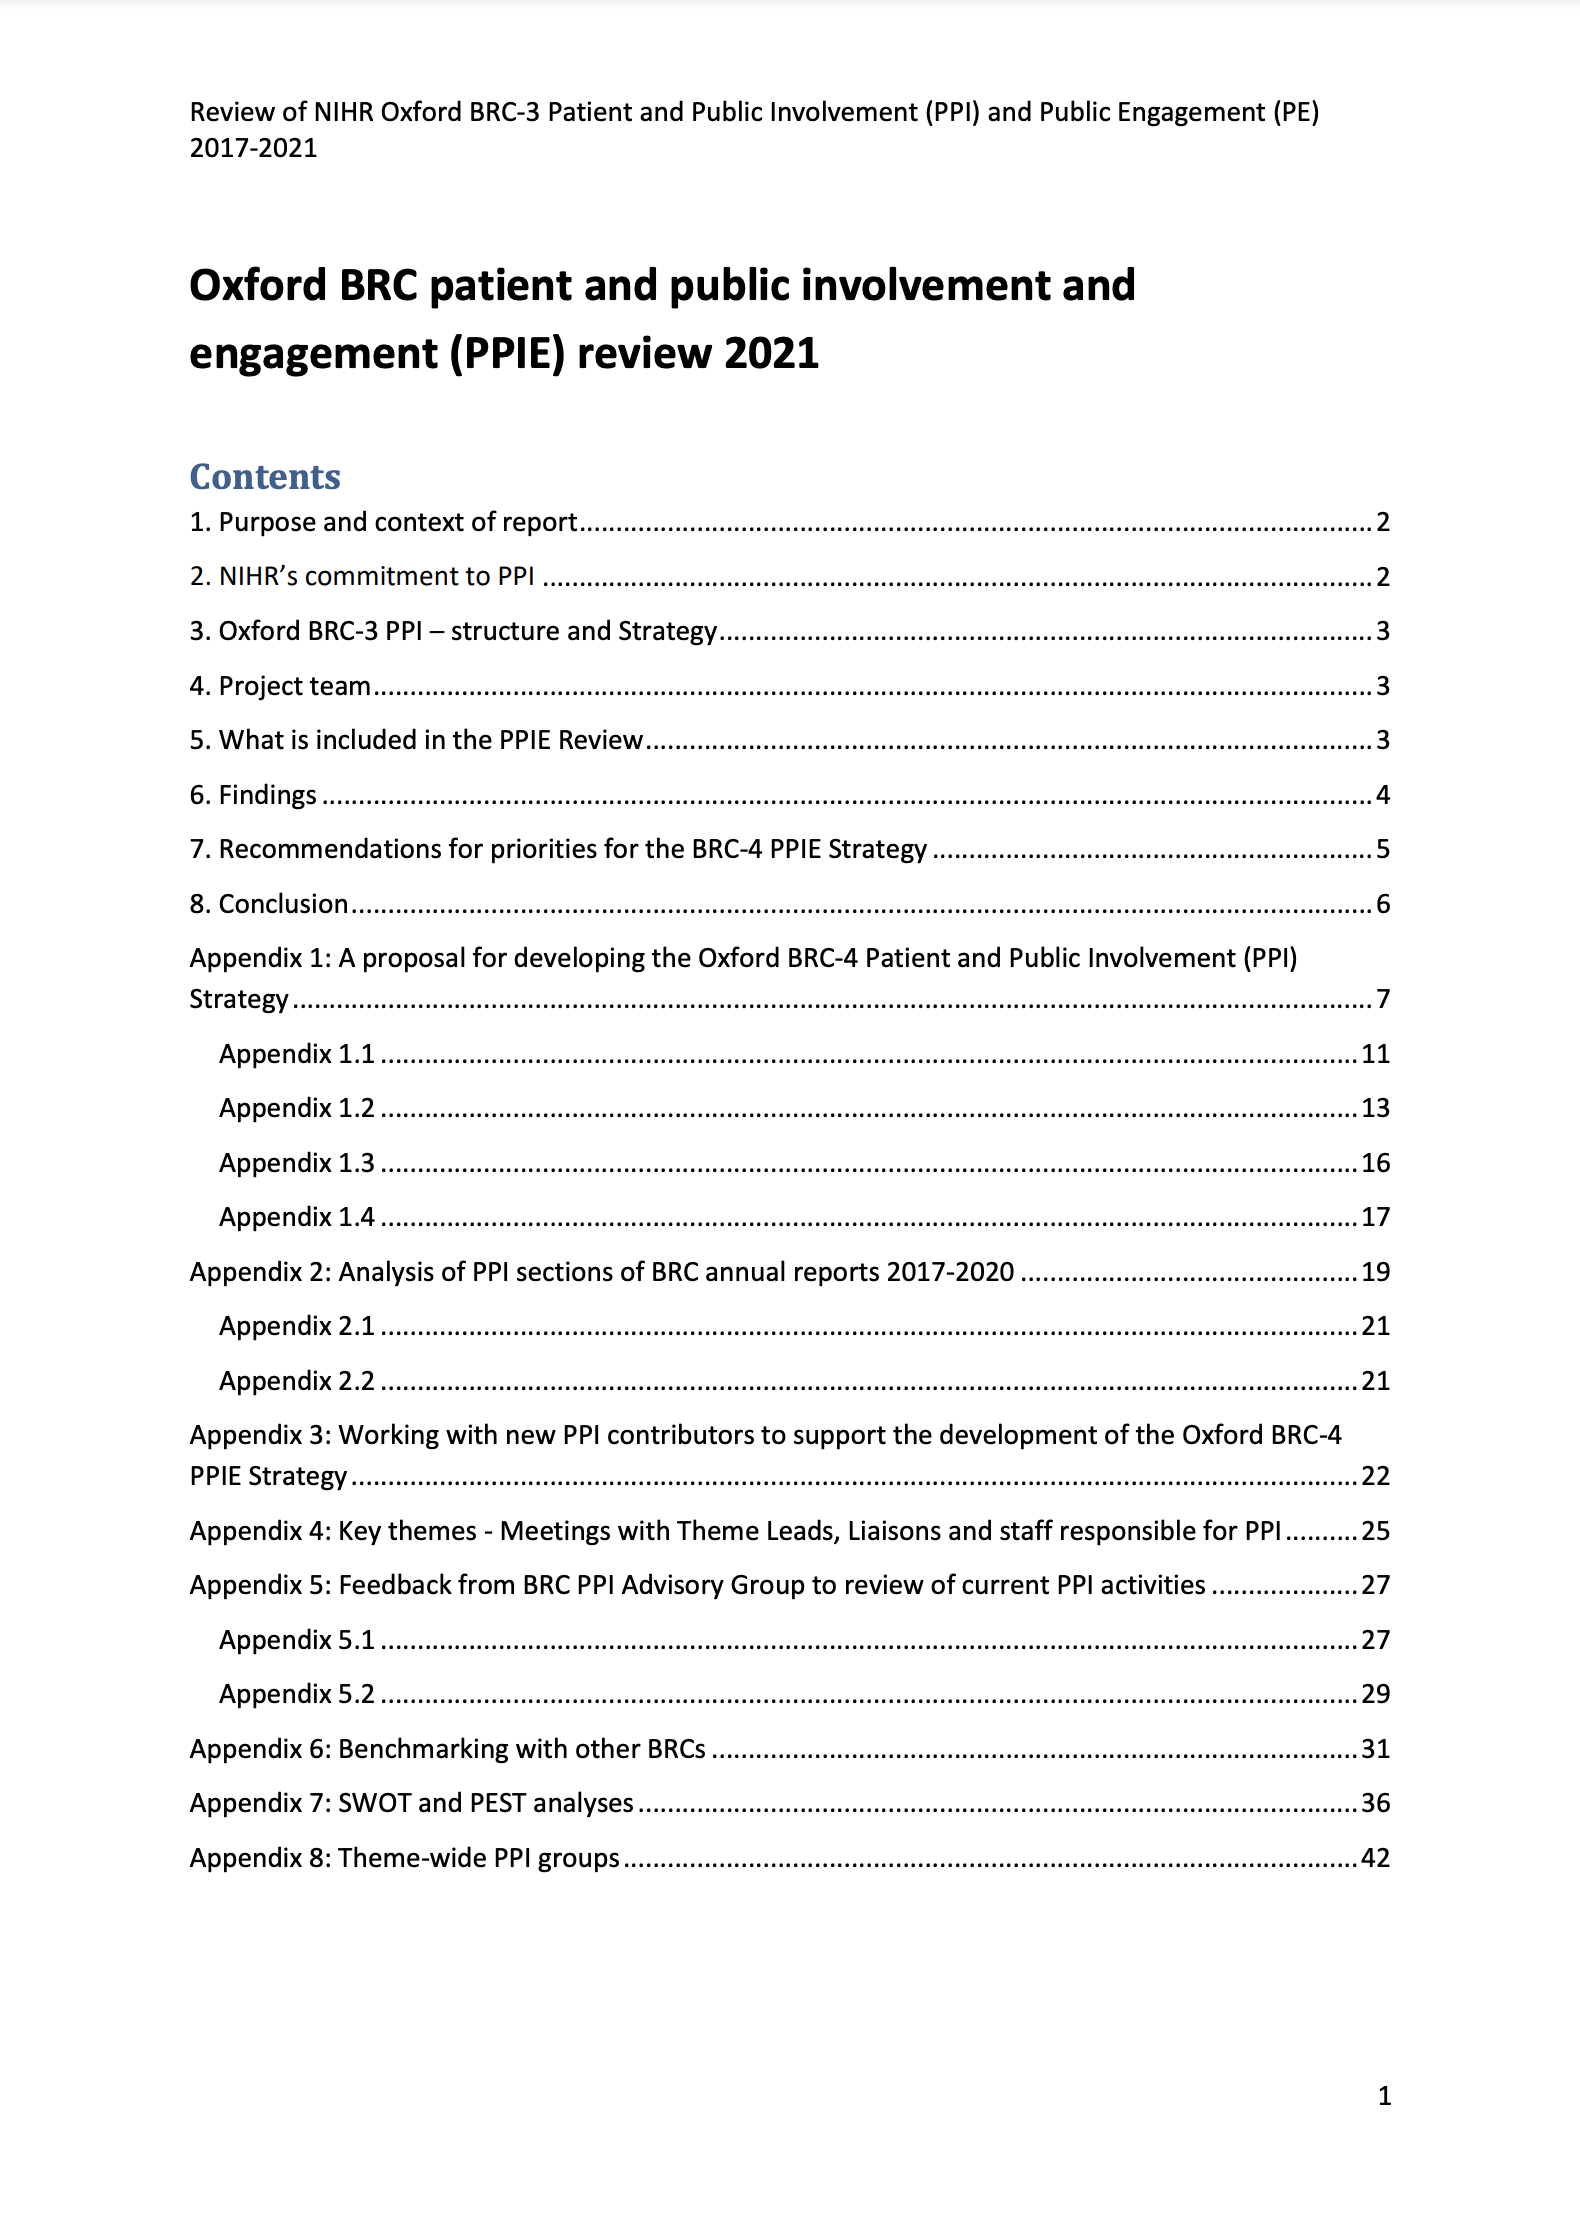 Preview of PDF link: Oxford BRC public involvement and engagement review /